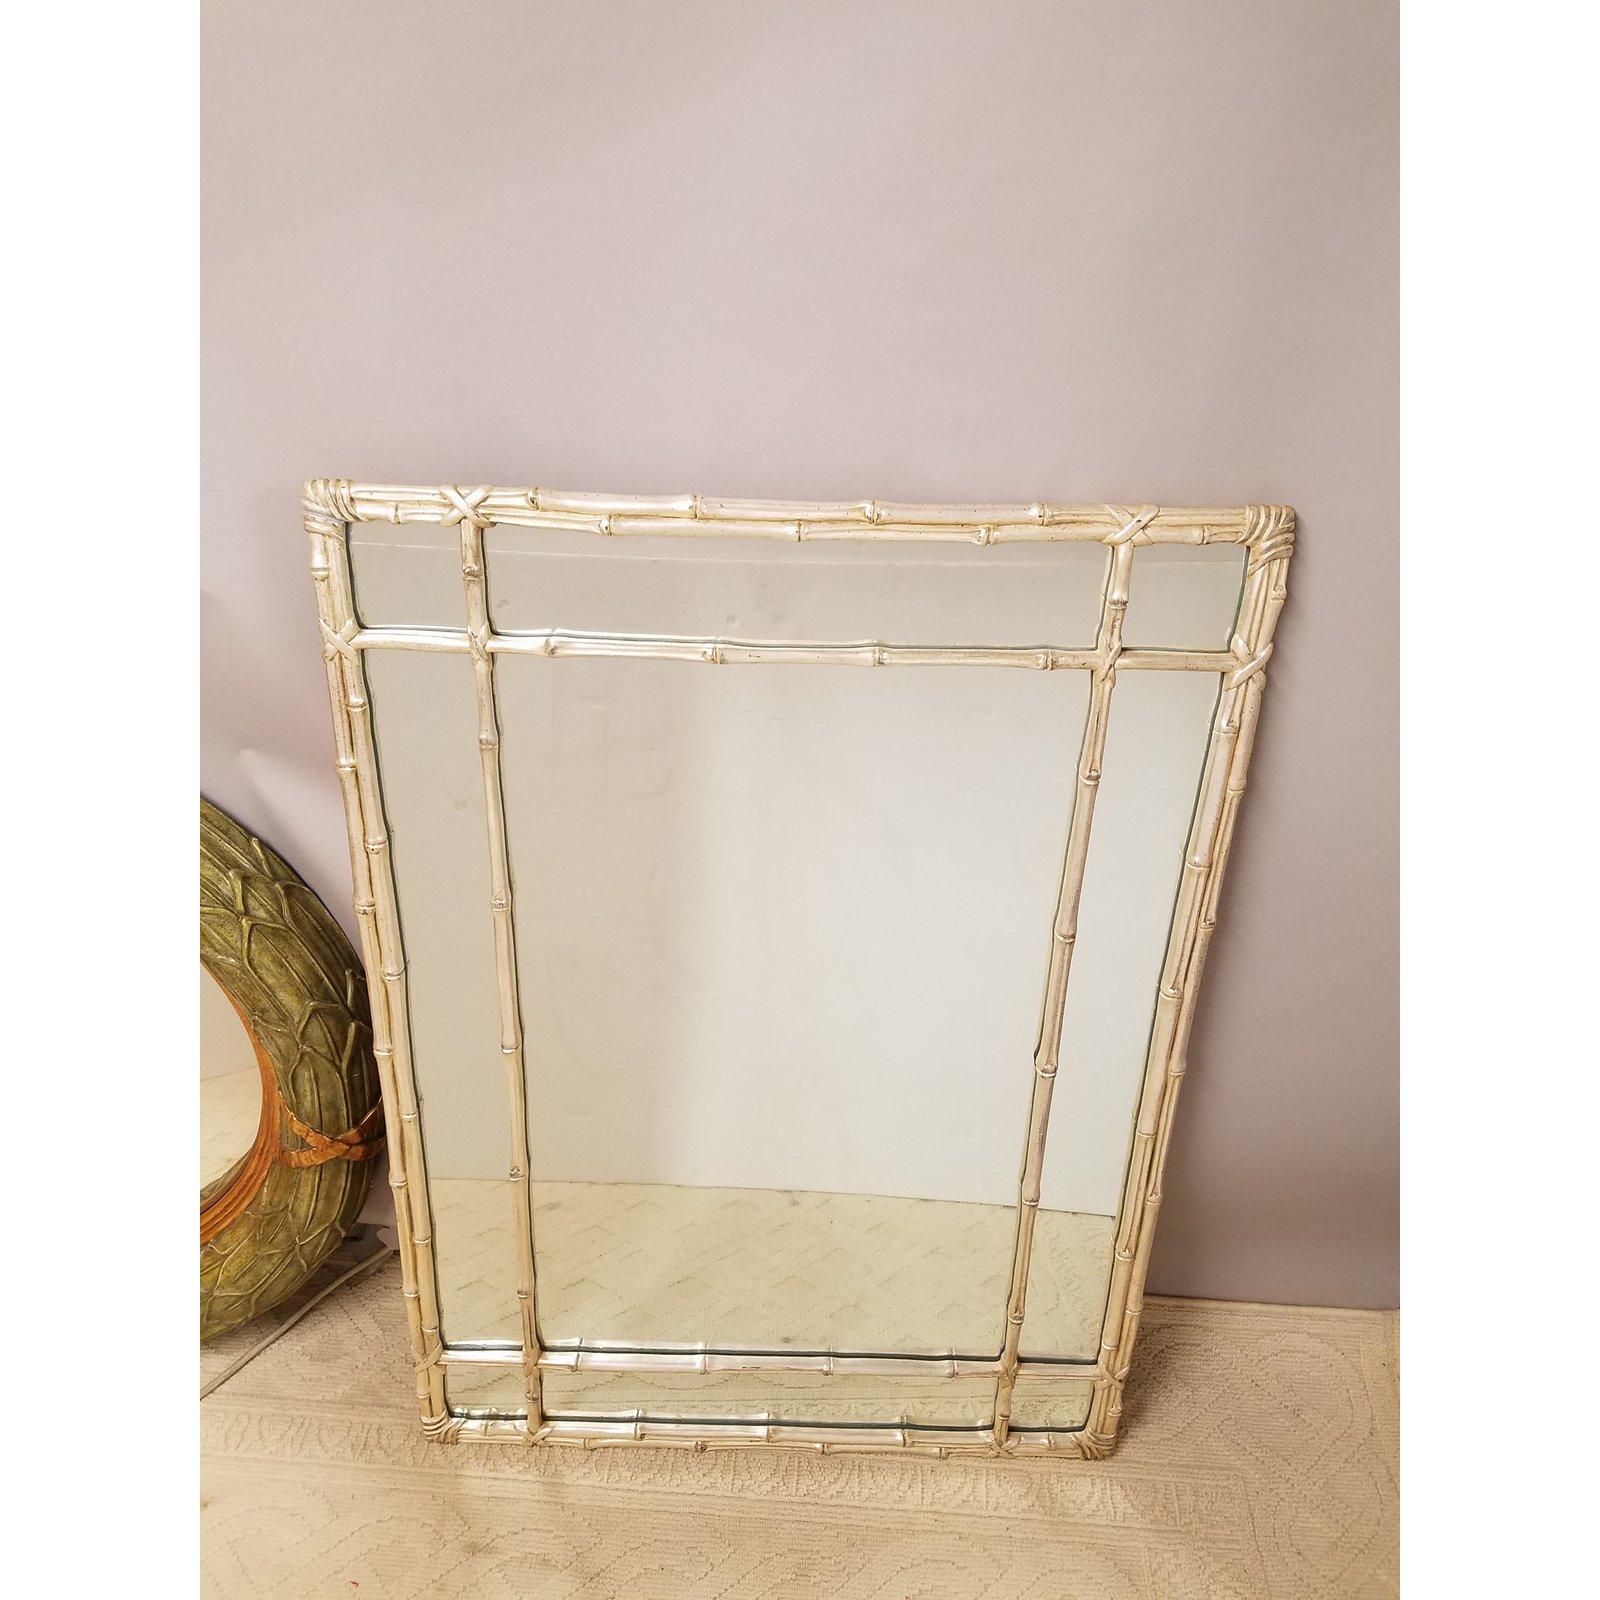 Classic silver guilt faux bamboo framed wood mirror by Carves Guild. Chick silver leaf finish.